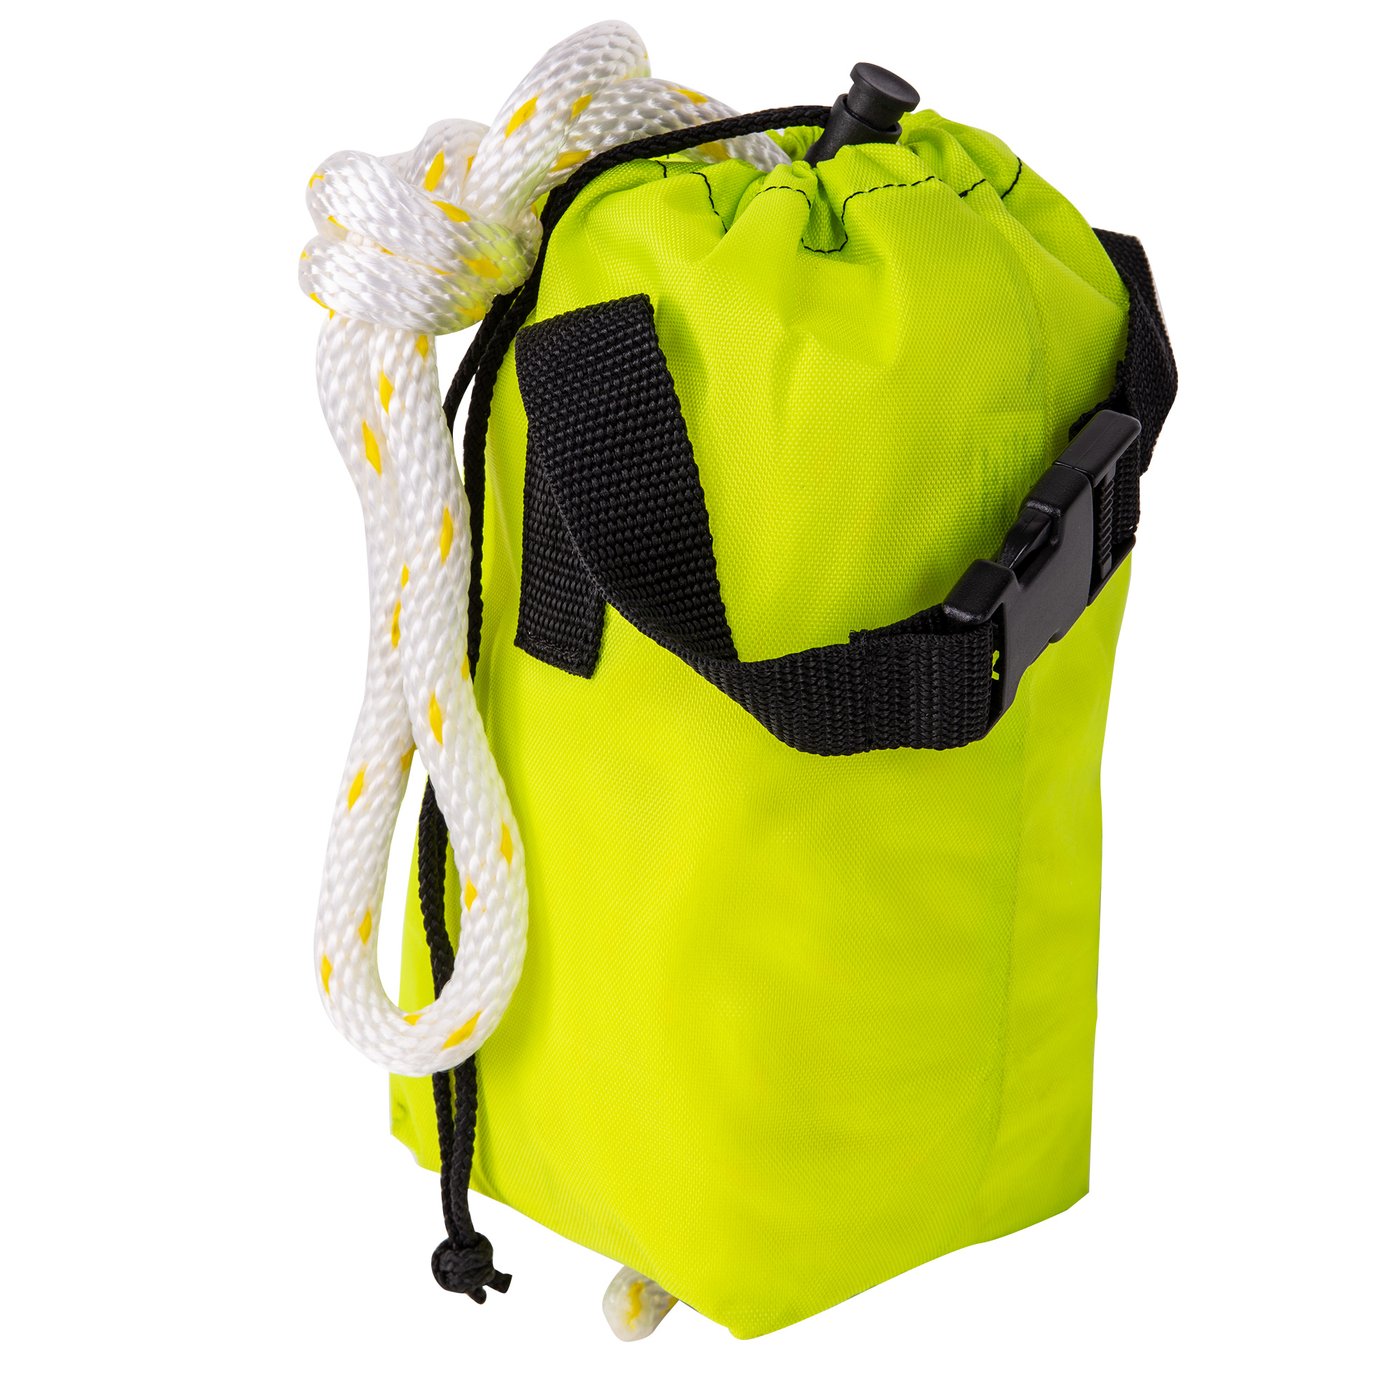 NRS Pro Compact Rescue Throw Bag : Amazon.in: Sports, Fitness & Outdoors